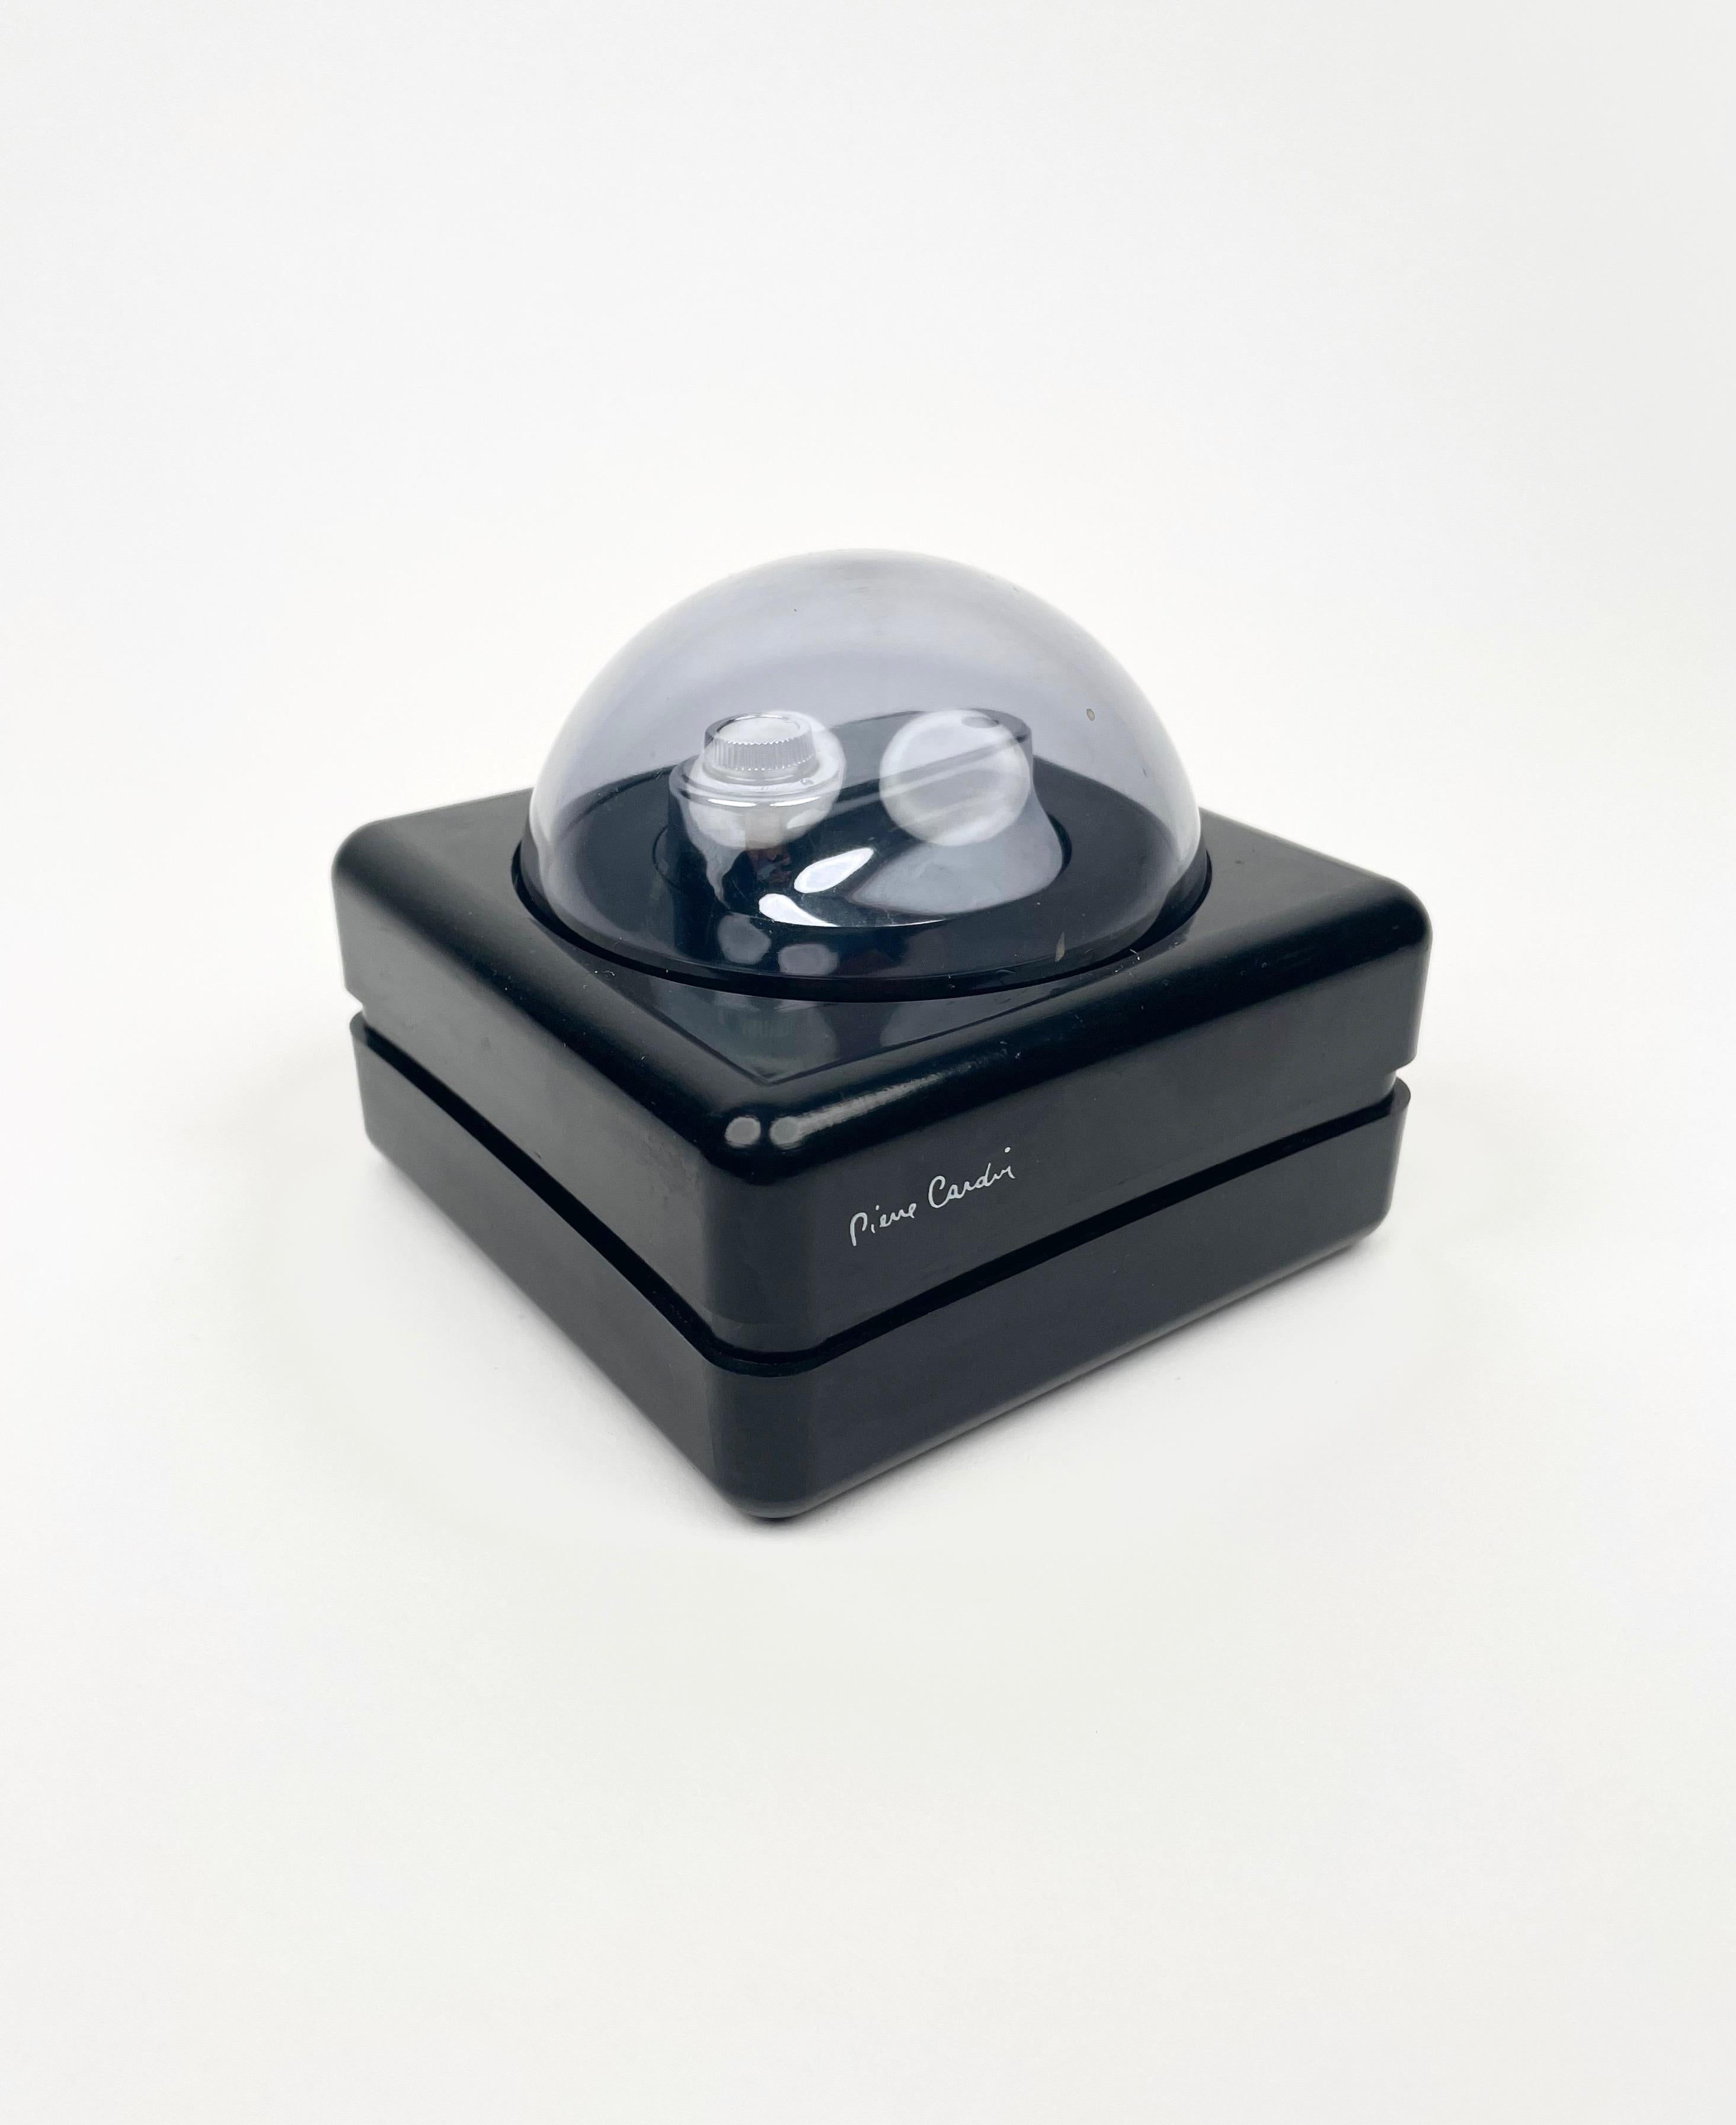 Black table lighter with smoked plexiglass dome featuring wonderful round lines, typical of the space age. This piece was designed and signed by Pierre Cardin and produced in France during the 1970s. 

The lighter system was not tested for